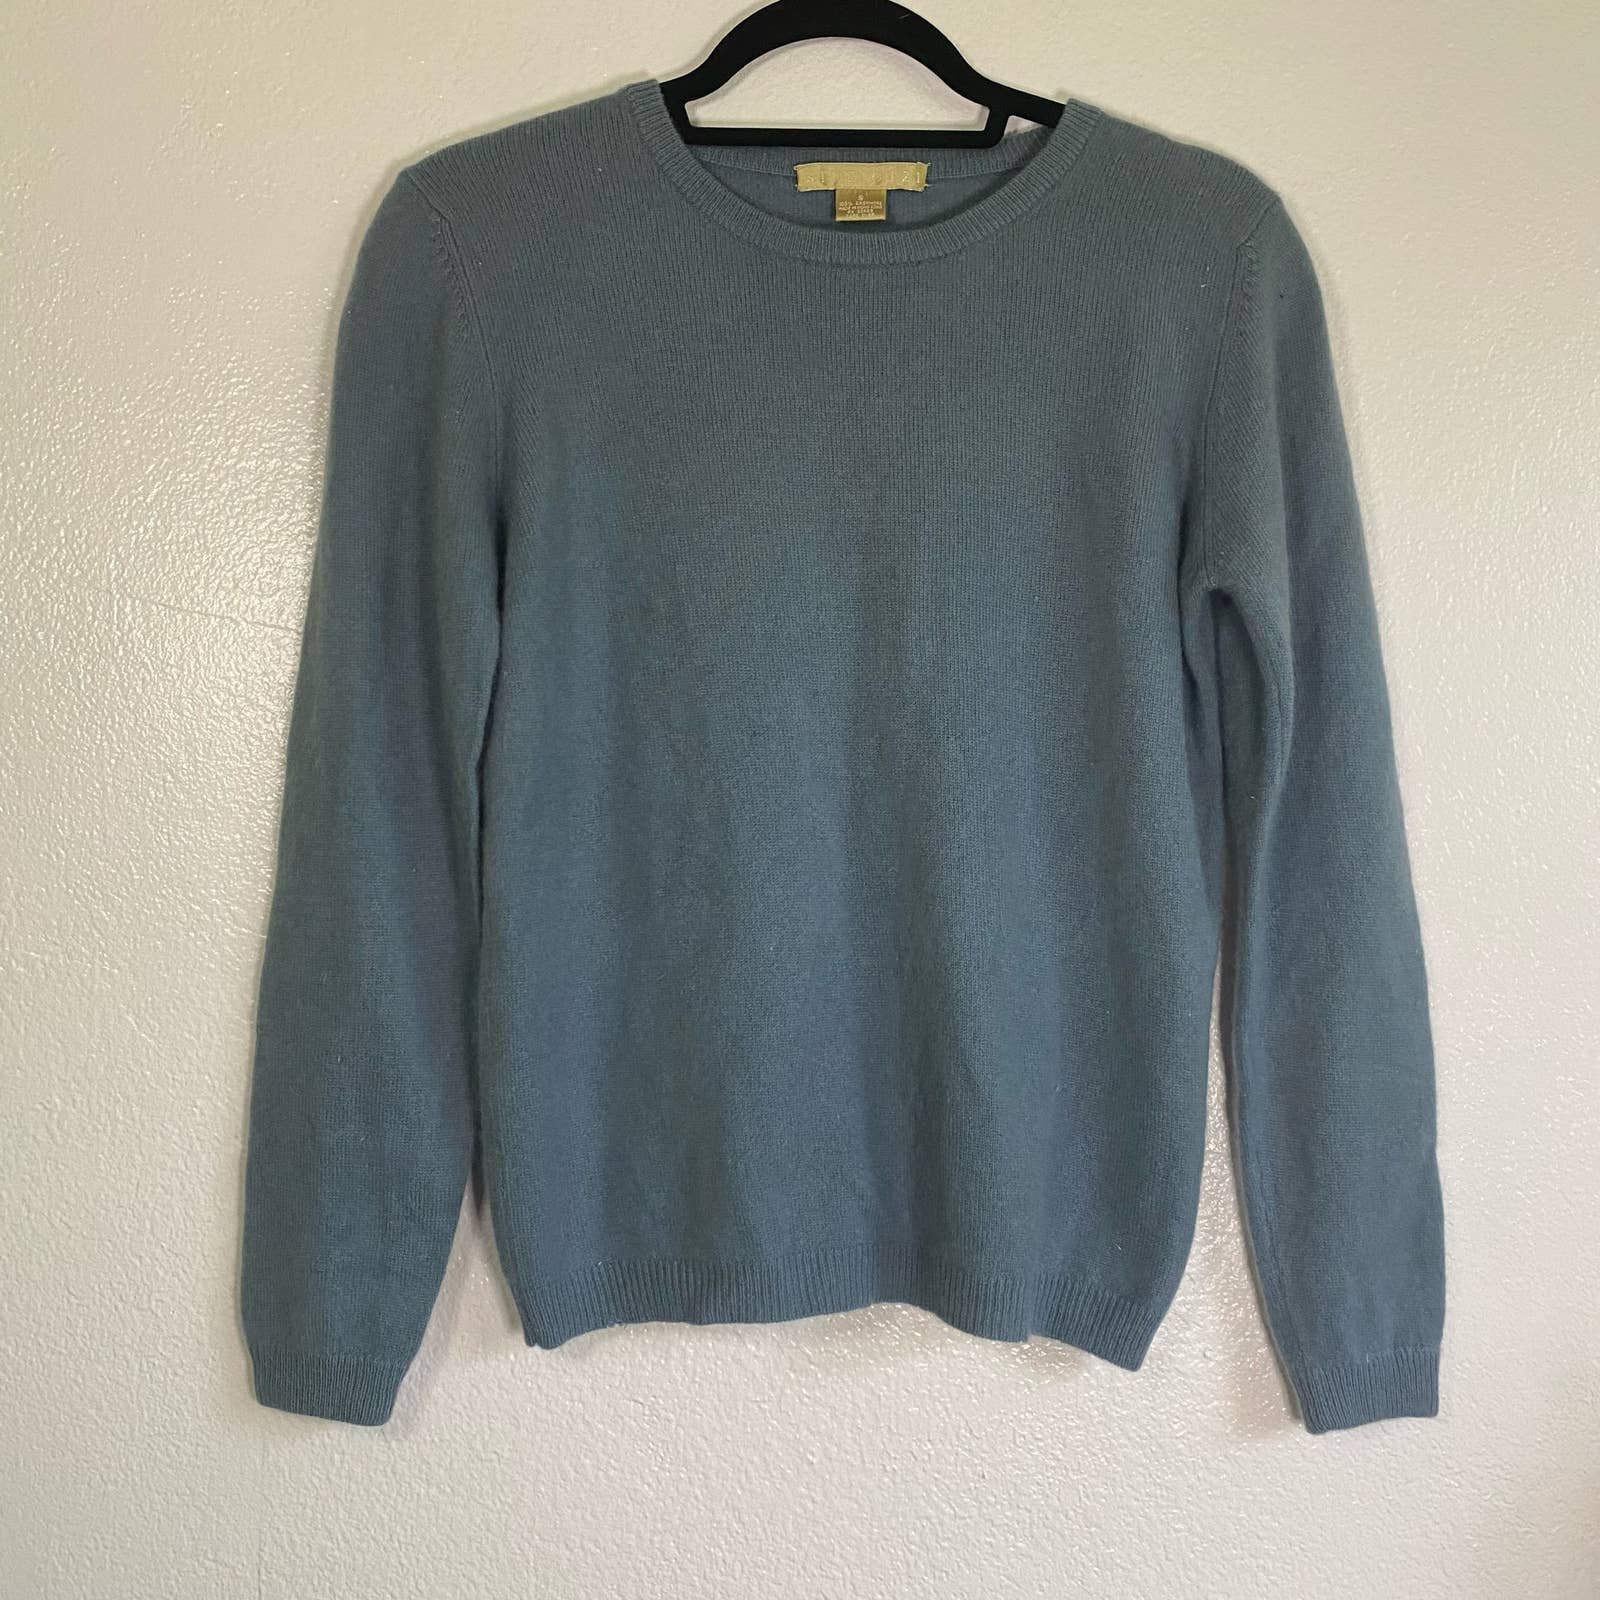 Beautiful NORDSTROM Studio 121 Cashmere Long Sleeve sweater Size S JDMW1kpGp New Style